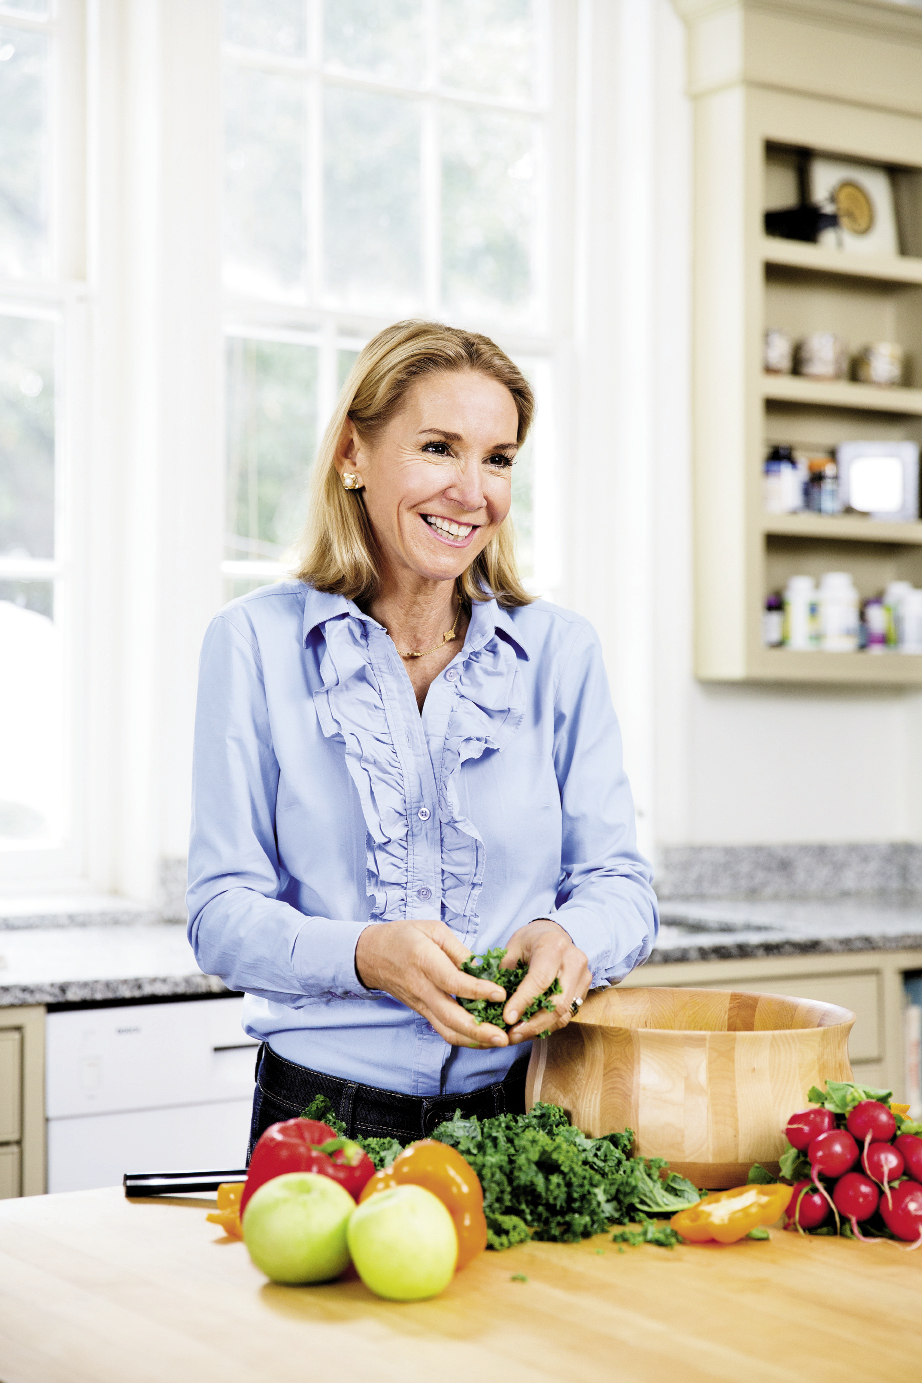 “I grew up with Southern food, and I love it,” notes Dr. Ann. “Sure, there are some culturally entrenched habits that aren’t good for us, but lots of traditional Southern foods are excellent super foods. It just depends on how you prepare them.”